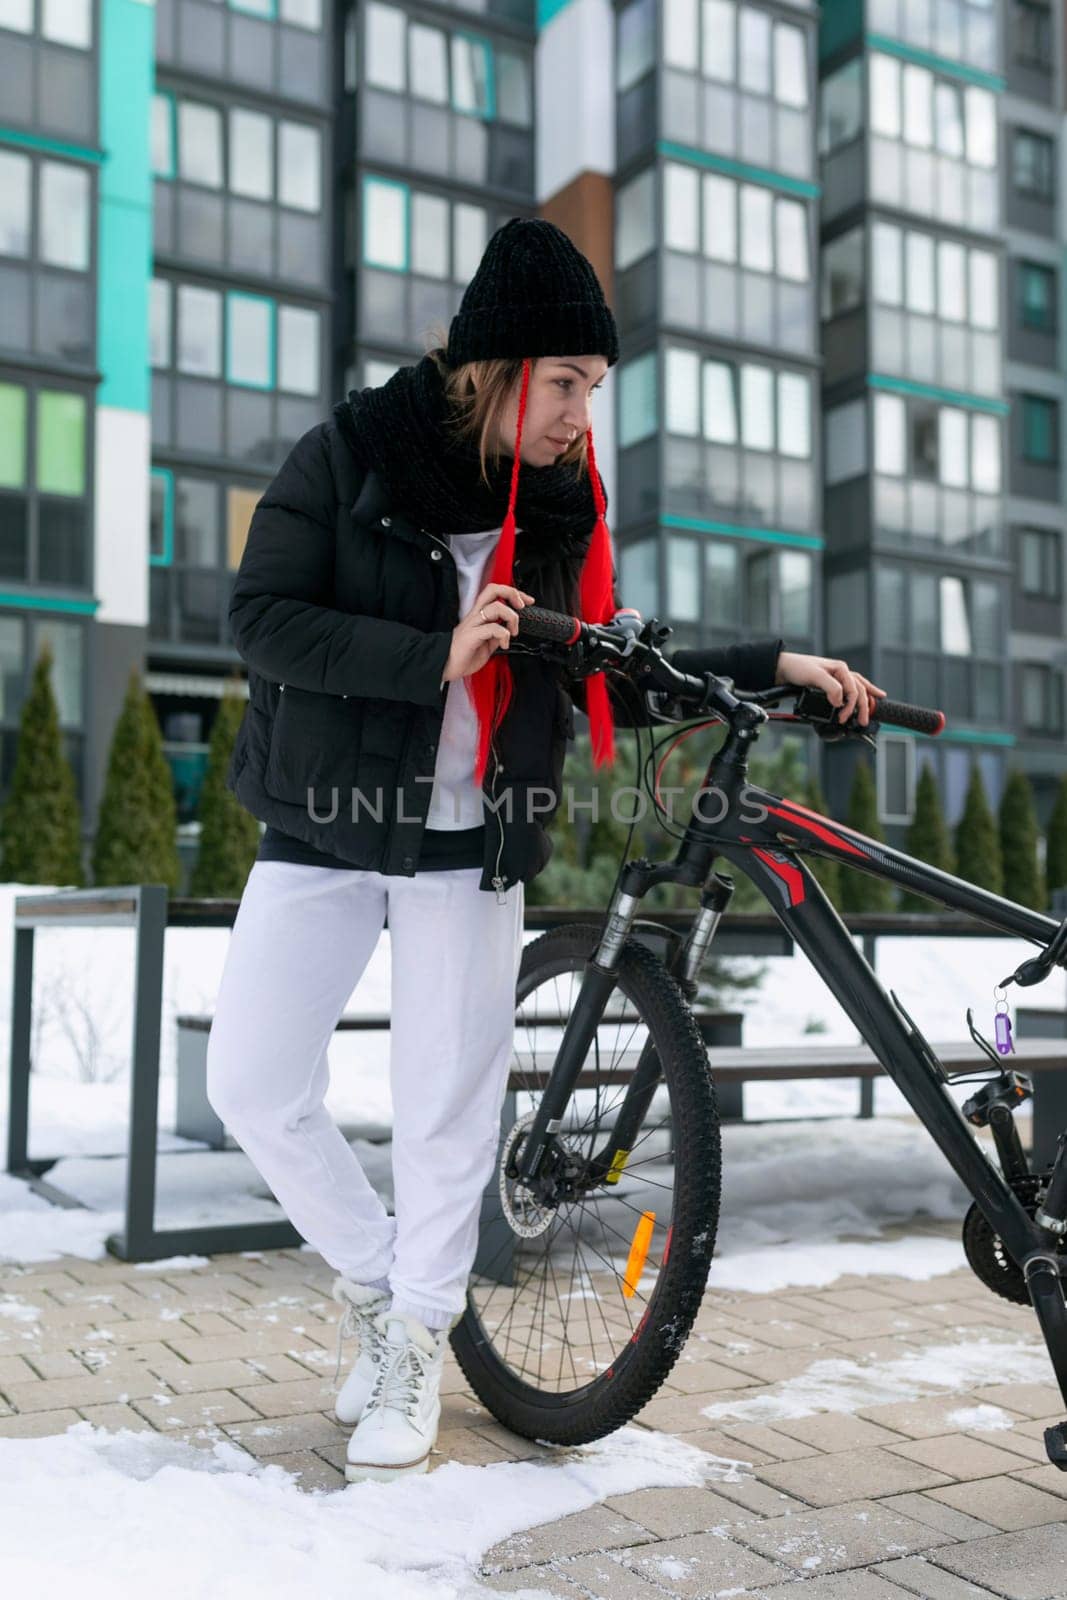 Lifestyle concept, Caucasian woman frolicking while riding a bicycle in winter.